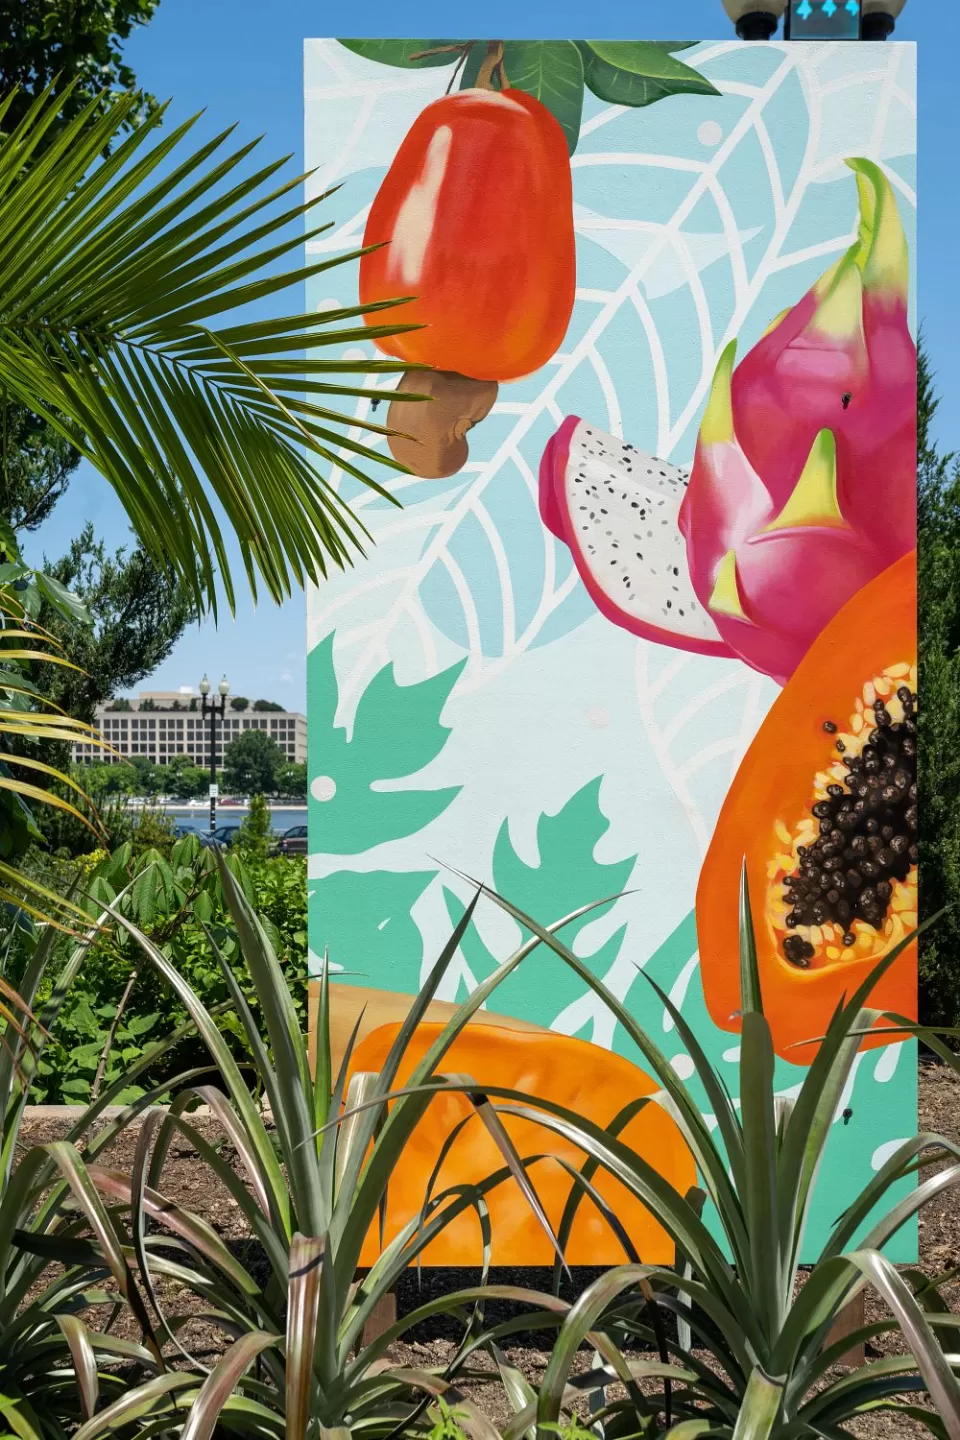 One of the 19 custom murals showcasing the origins of crops that were created for an outdoor portion of the exhibit.